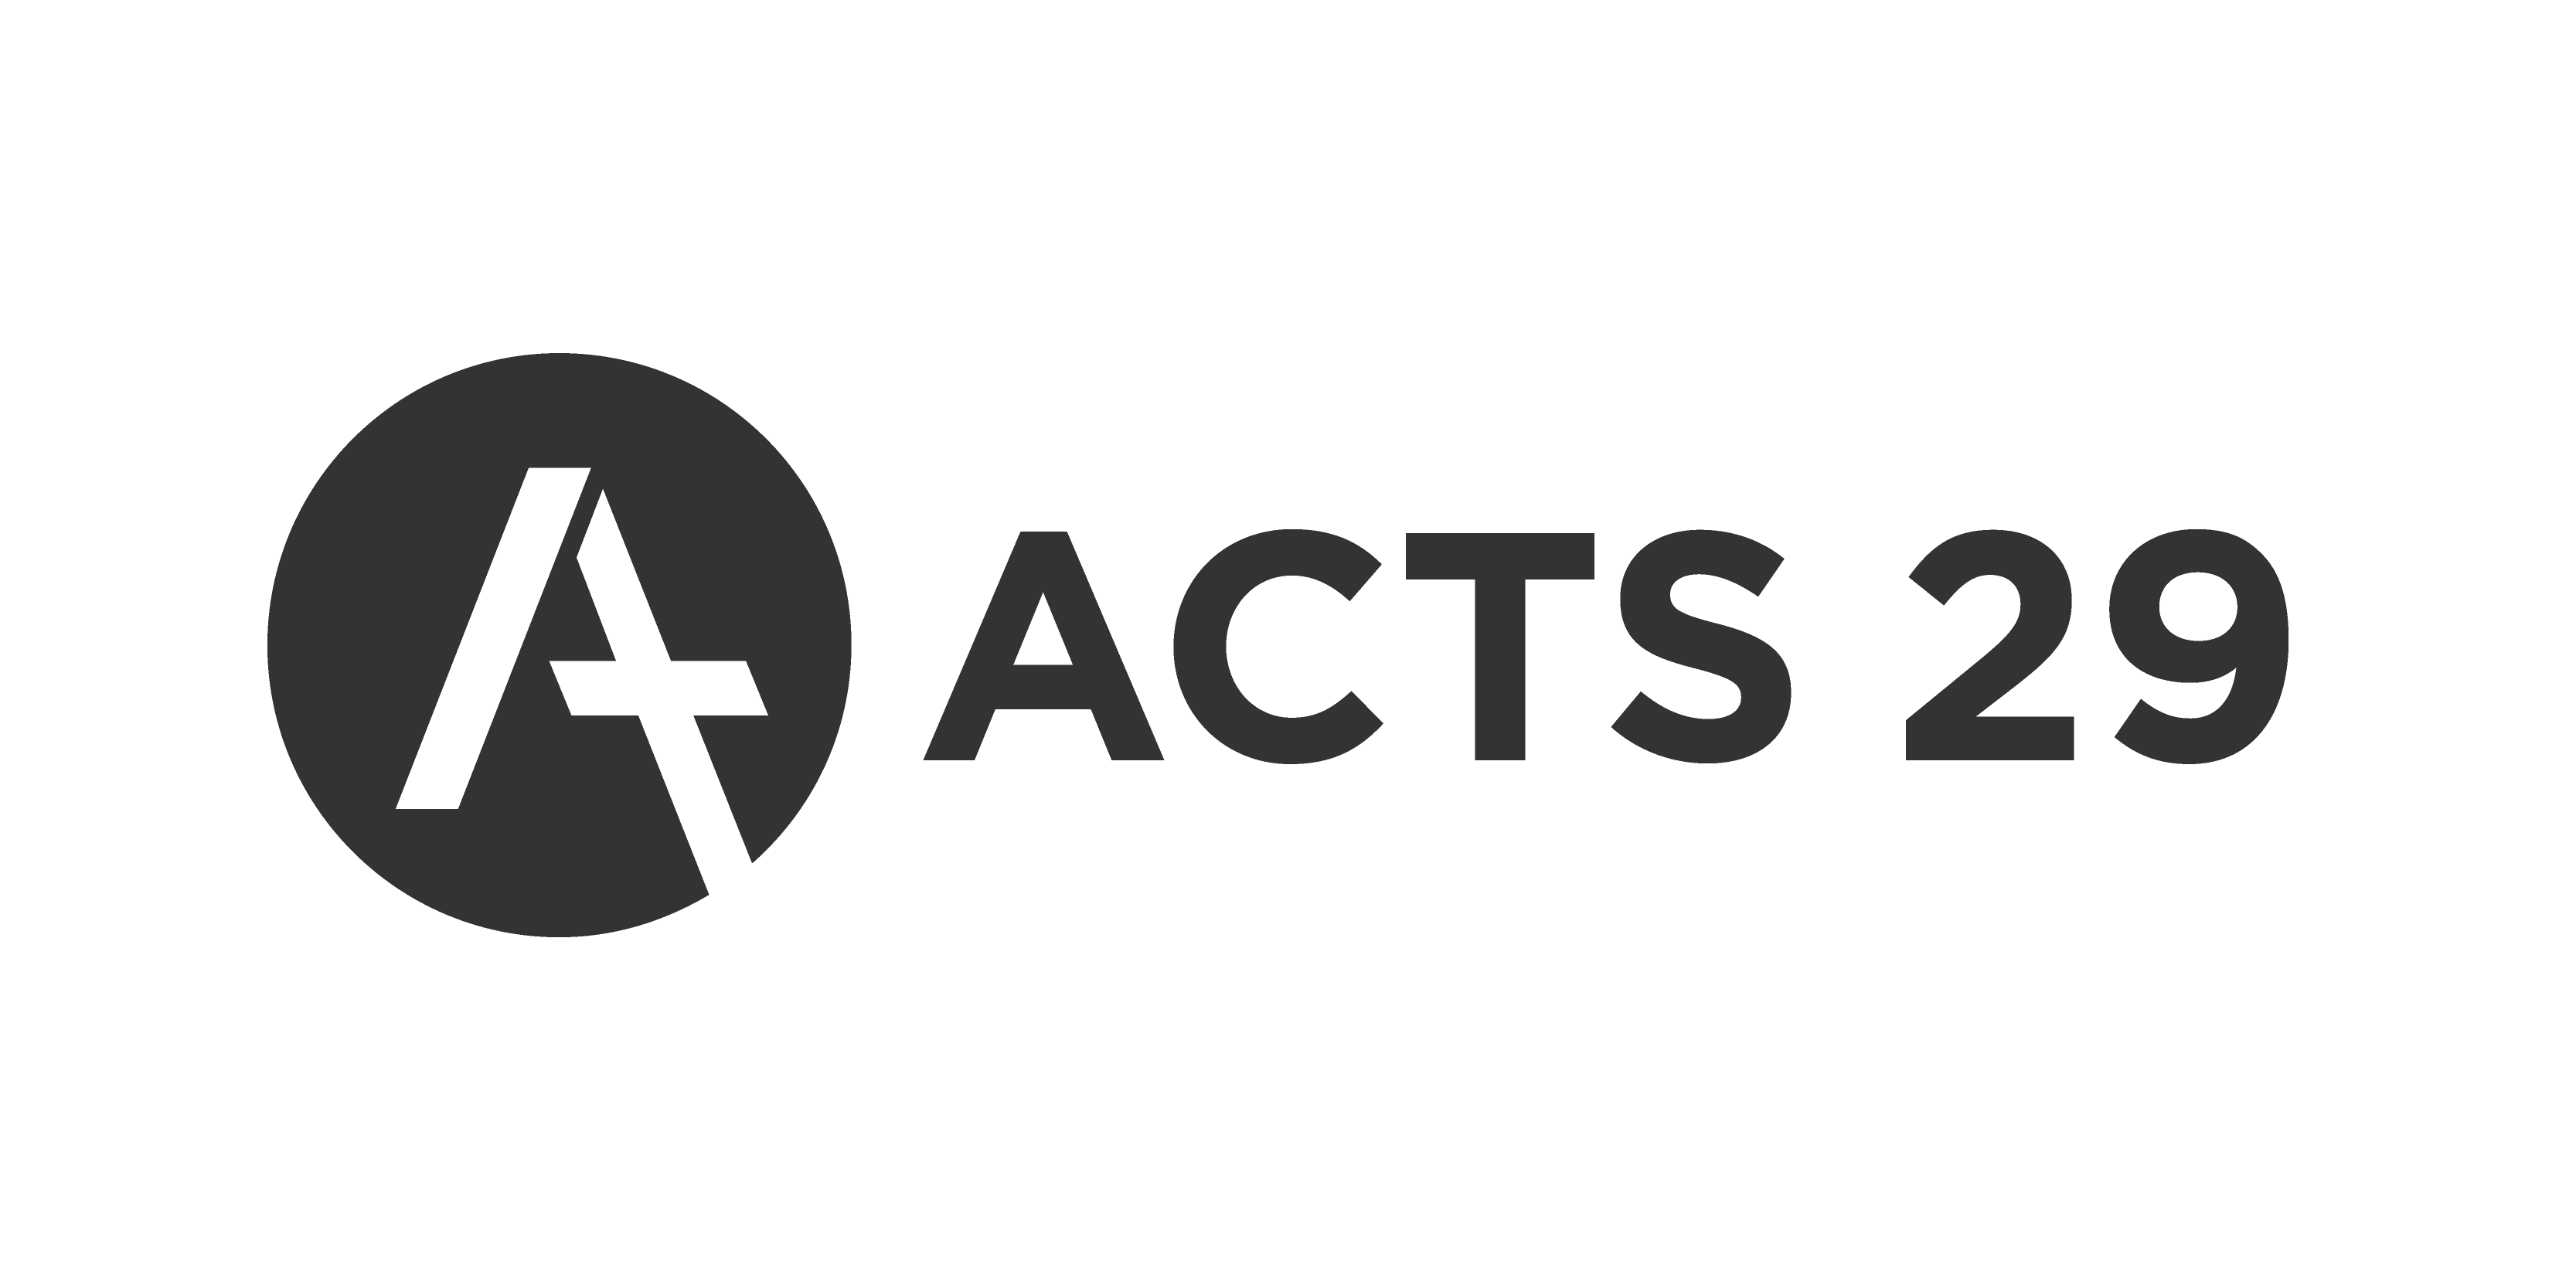 Acts 29 logo